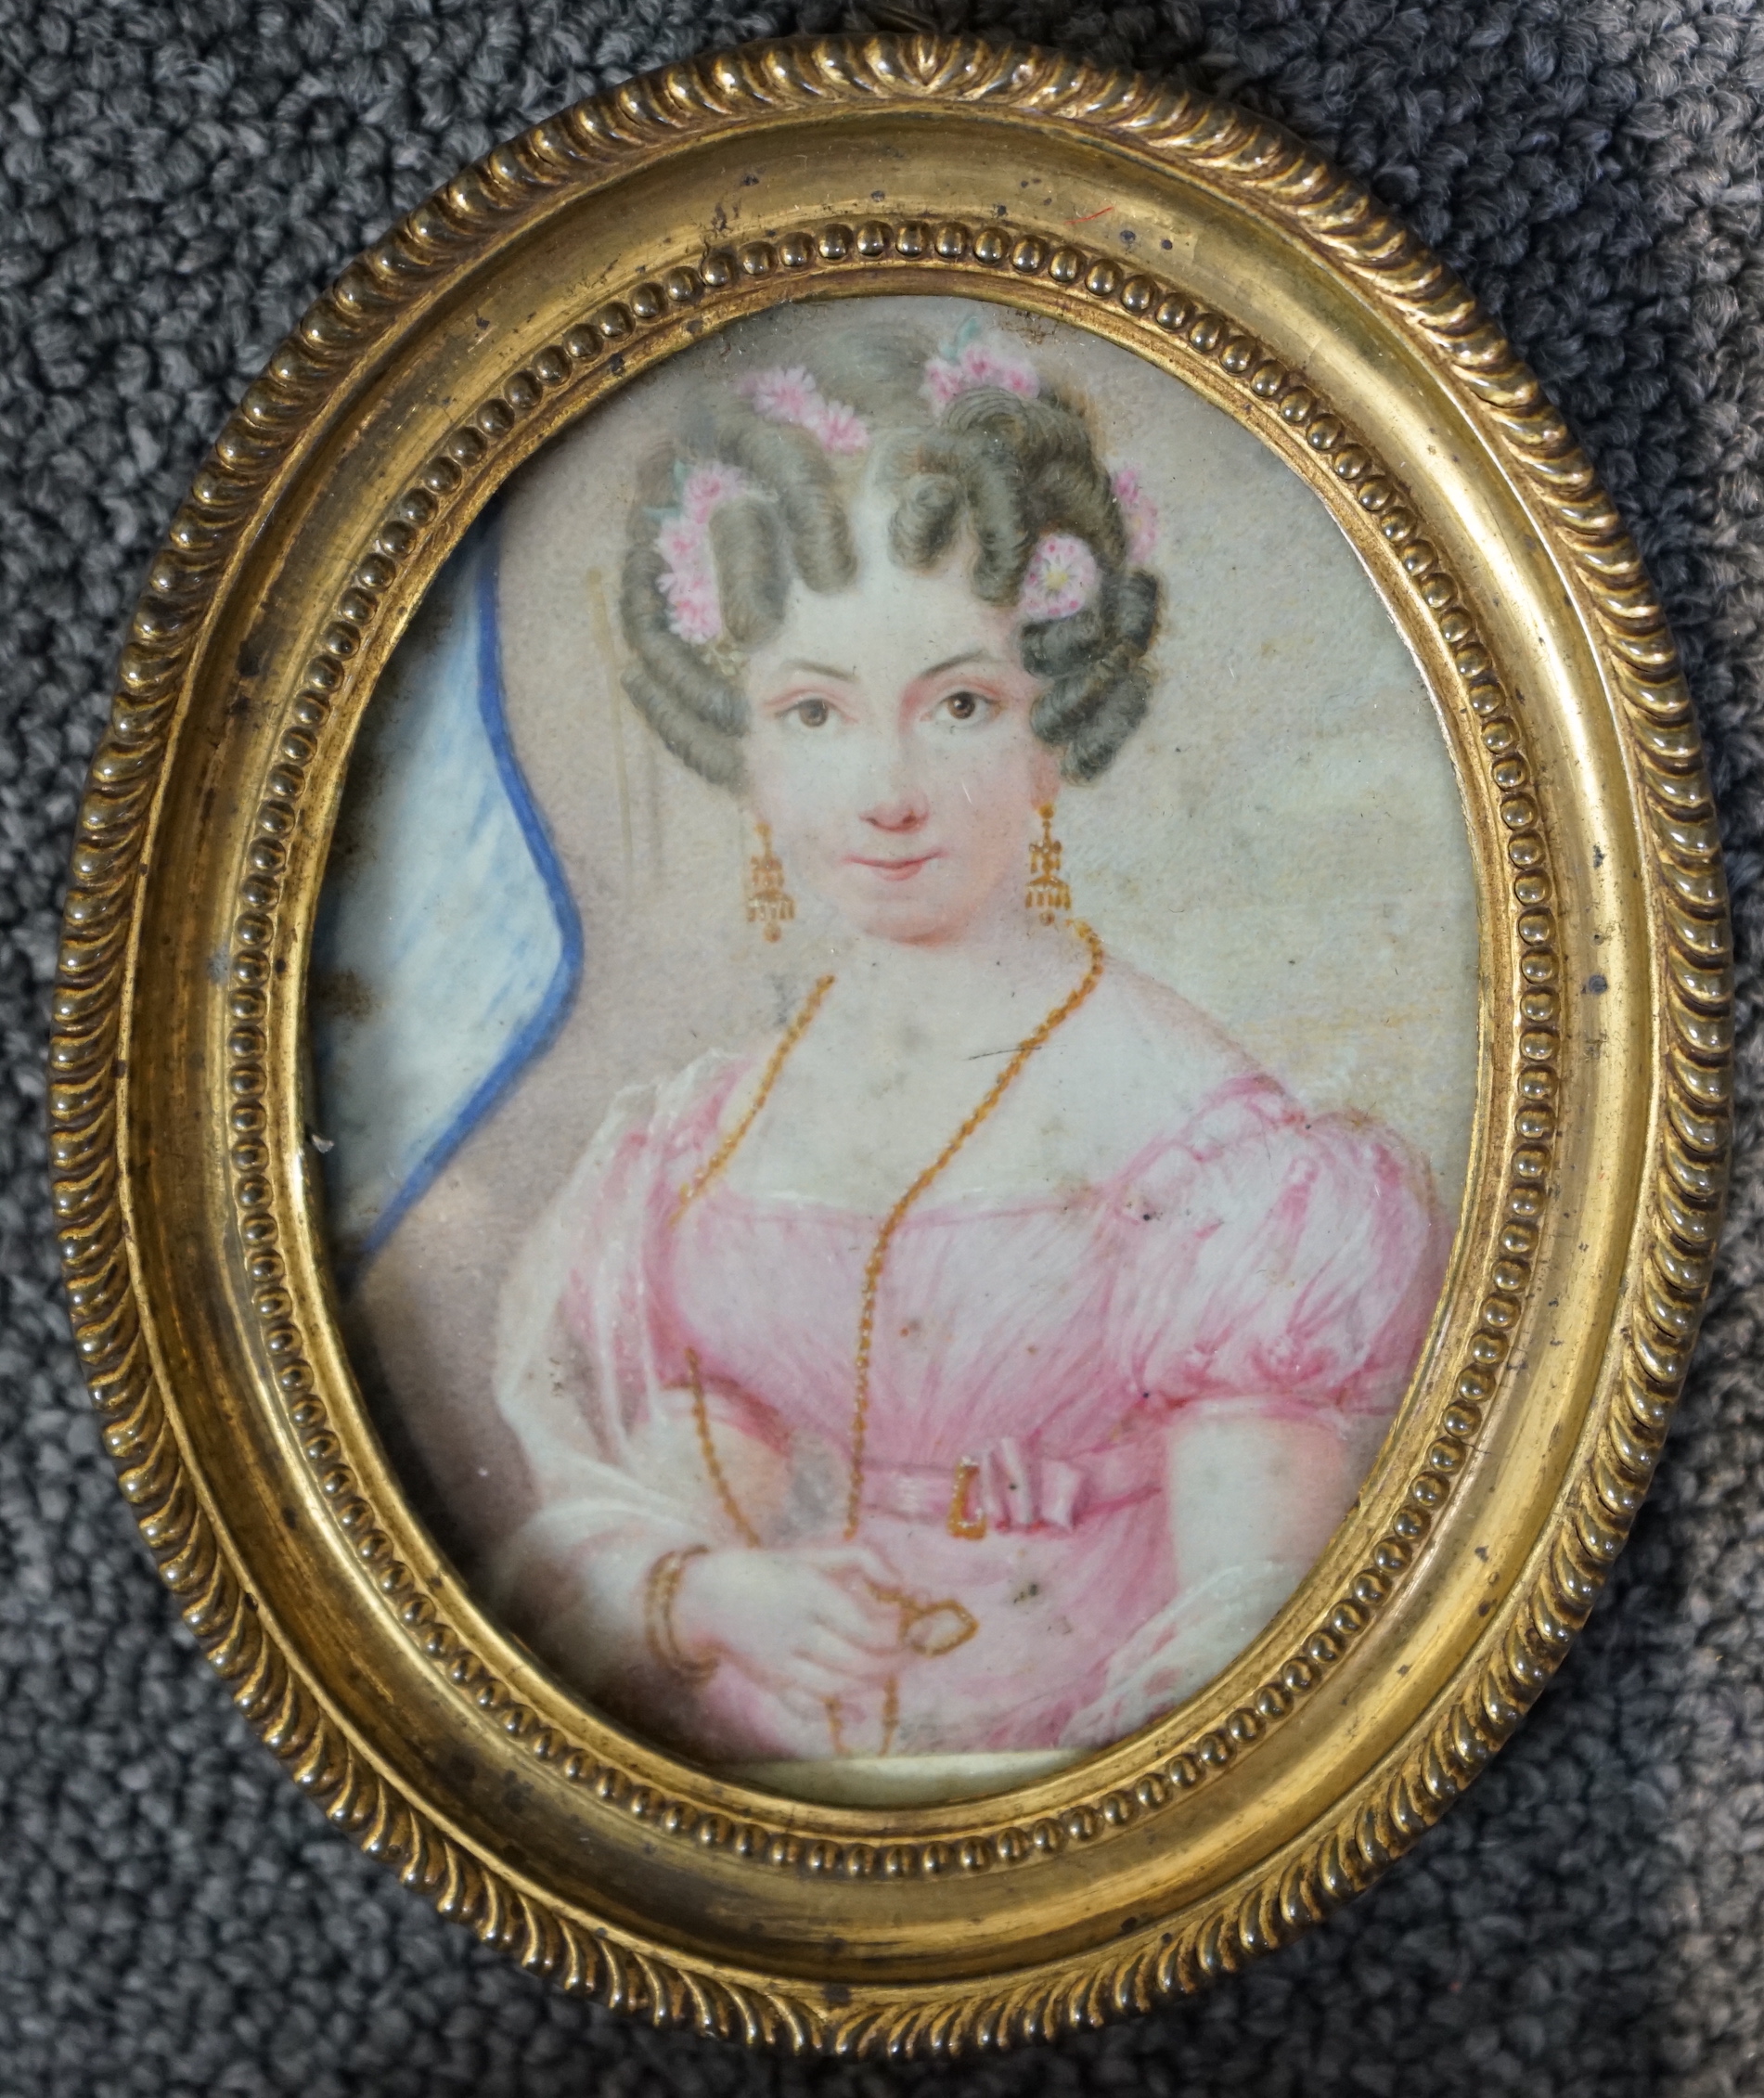 19th century French School, Portrait miniature of the actress Mademoiselle Vestris, watercolour on ivory, 9 x 7cm. CITES Submission reference Q2MK4M57